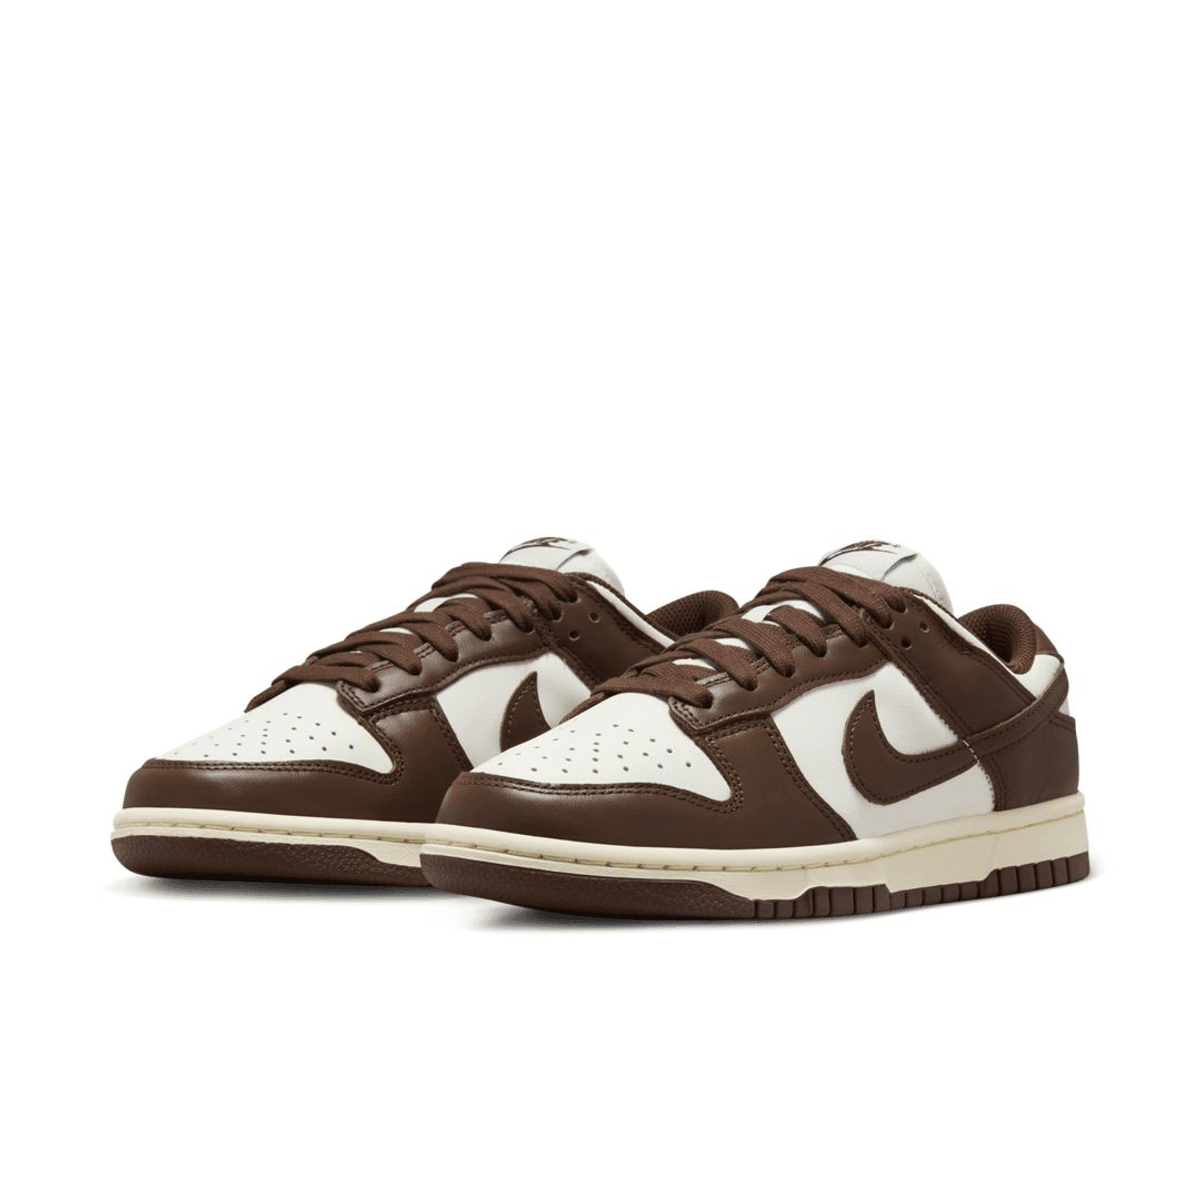 The Nike Dunk Low Mocha Is The Perfect Fusion of Classic Style and Modern Edge